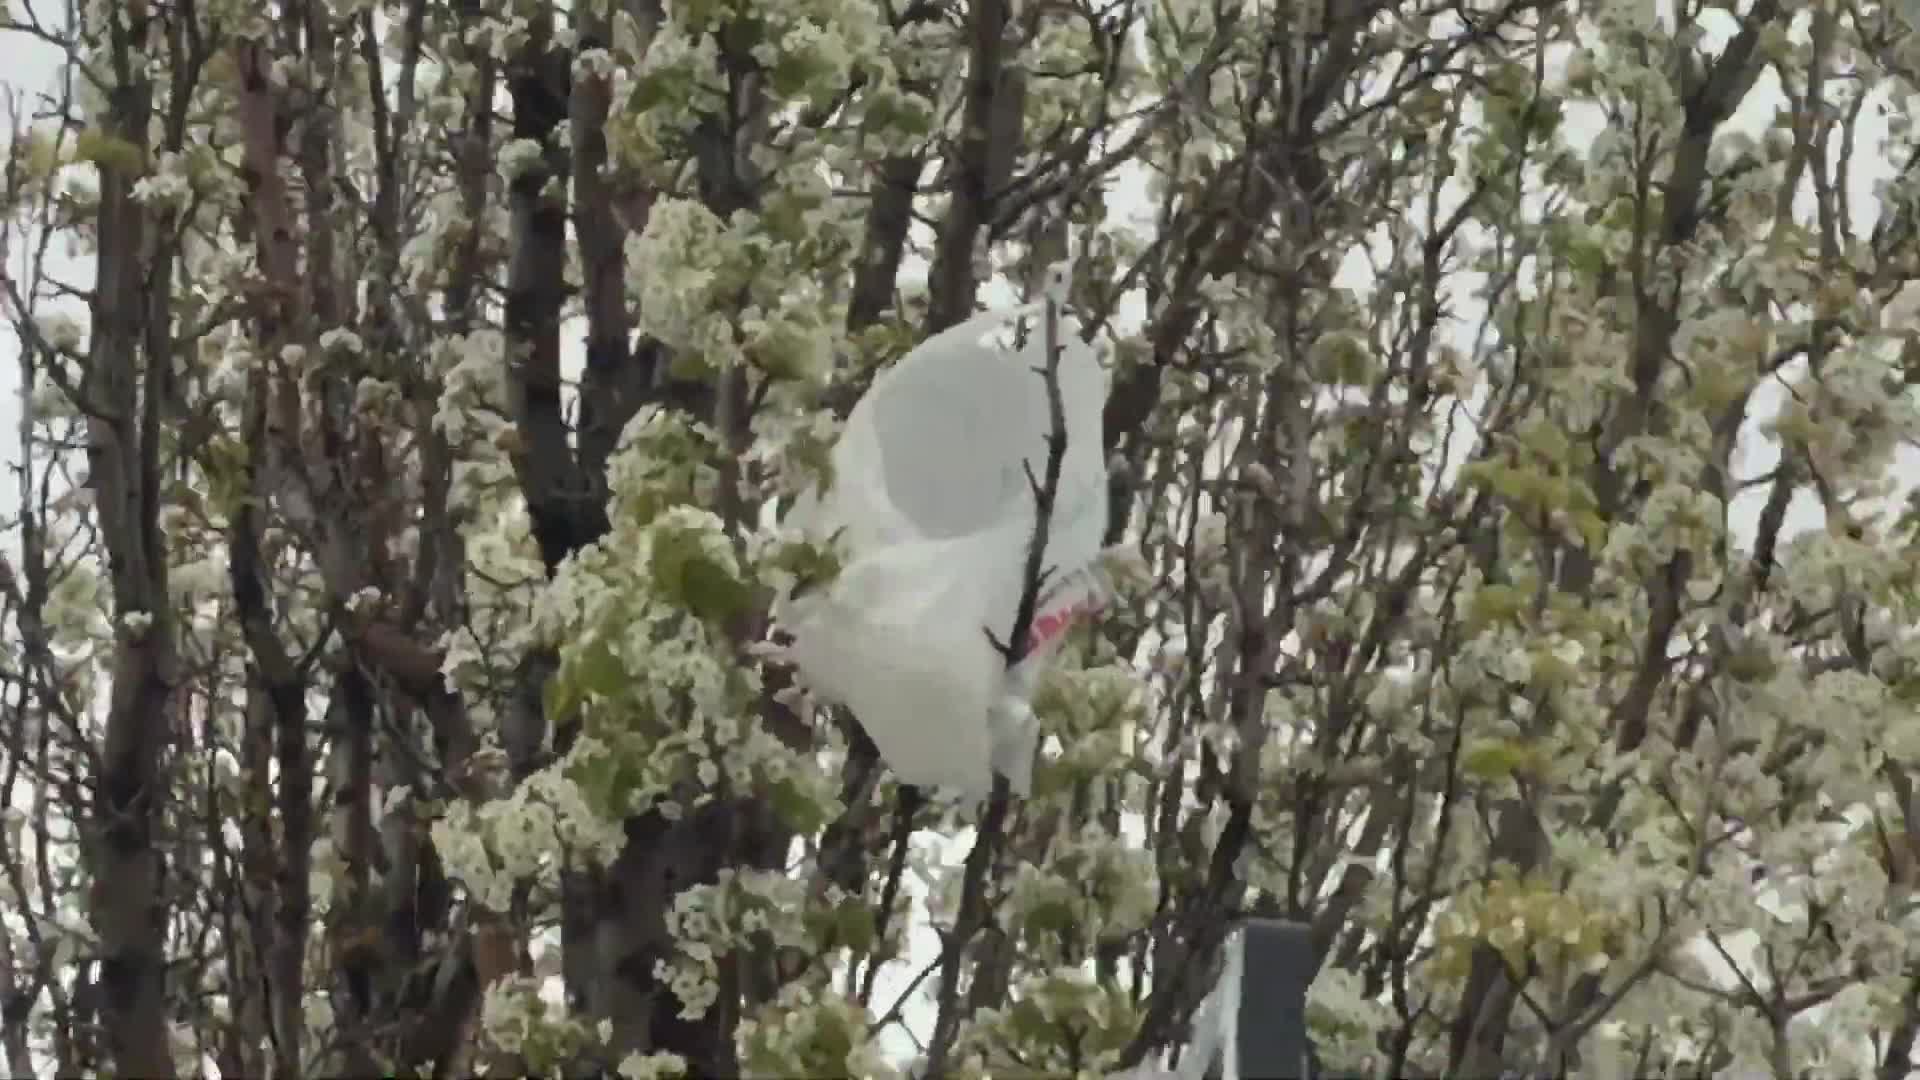 Another plastic bag stuck in a tree - Recorded on April 21, 2022, at 3:10PM MT